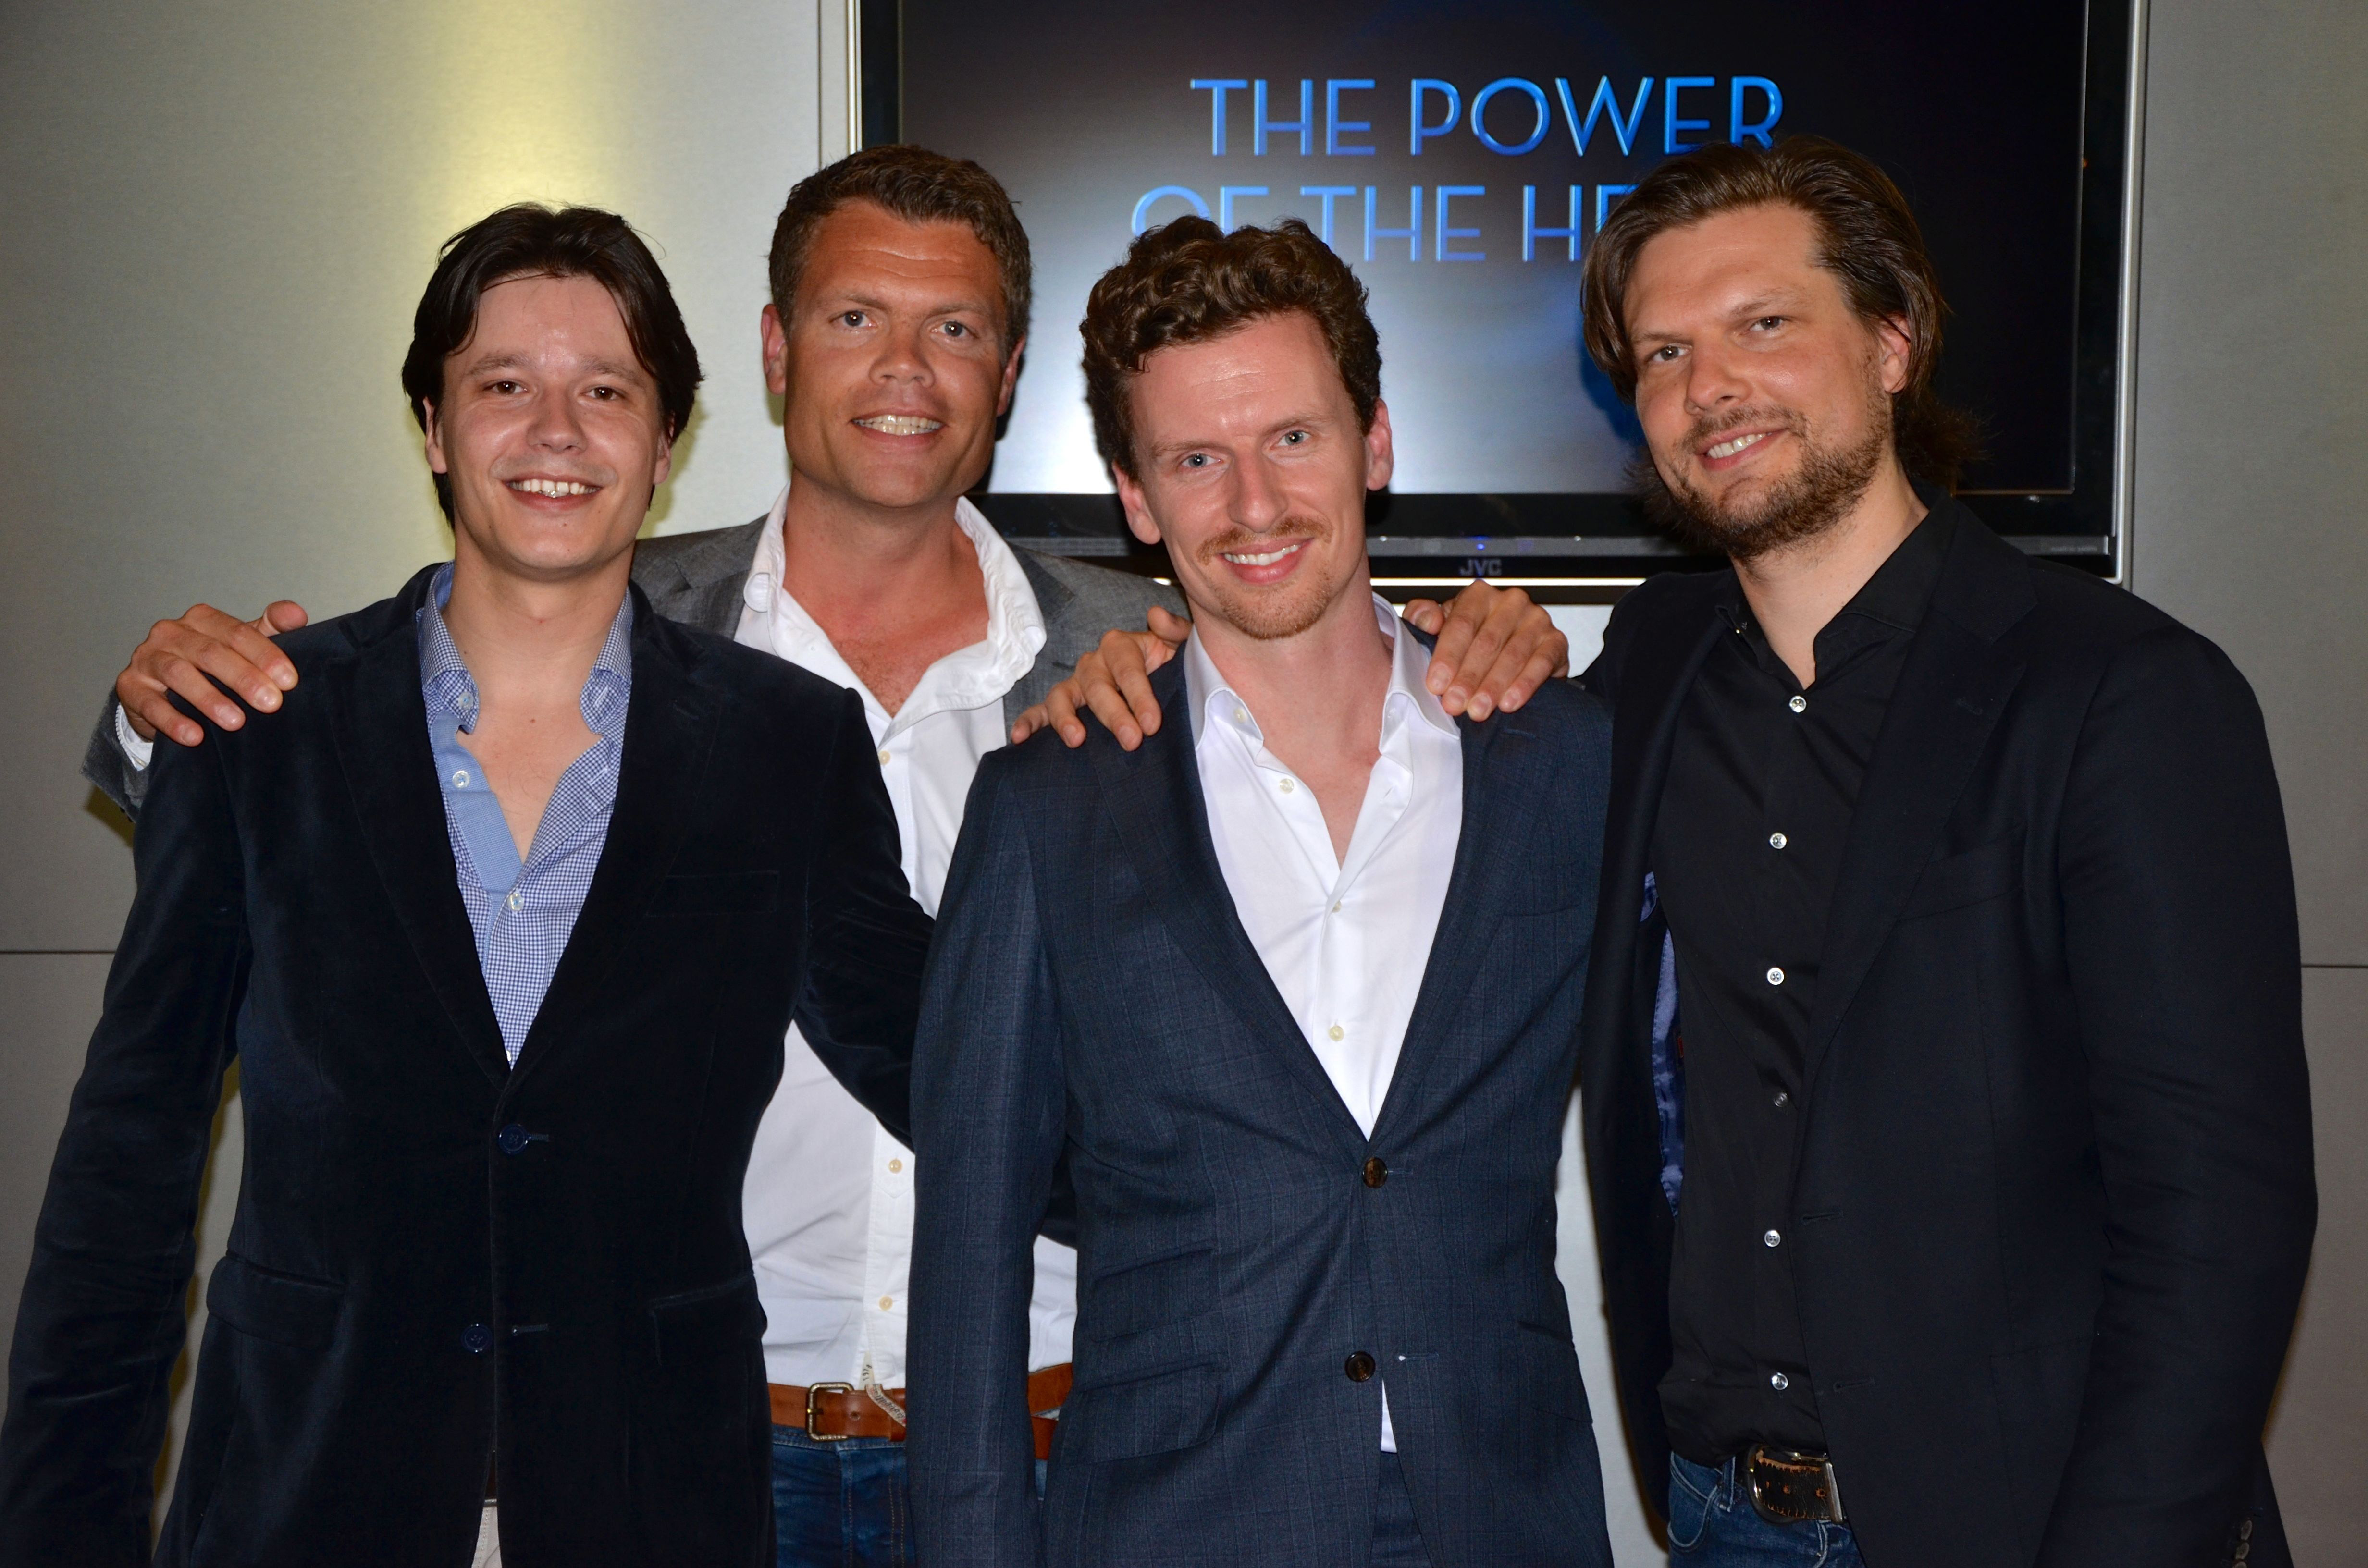 Mattijs van Moorsel (producer), Arnoud Fioole (producer), Drew Heriot (writer/director) and Baptist de Pape (producer/author) at the cast and crew' screening of 'The Power the Heart in Amsterdam.